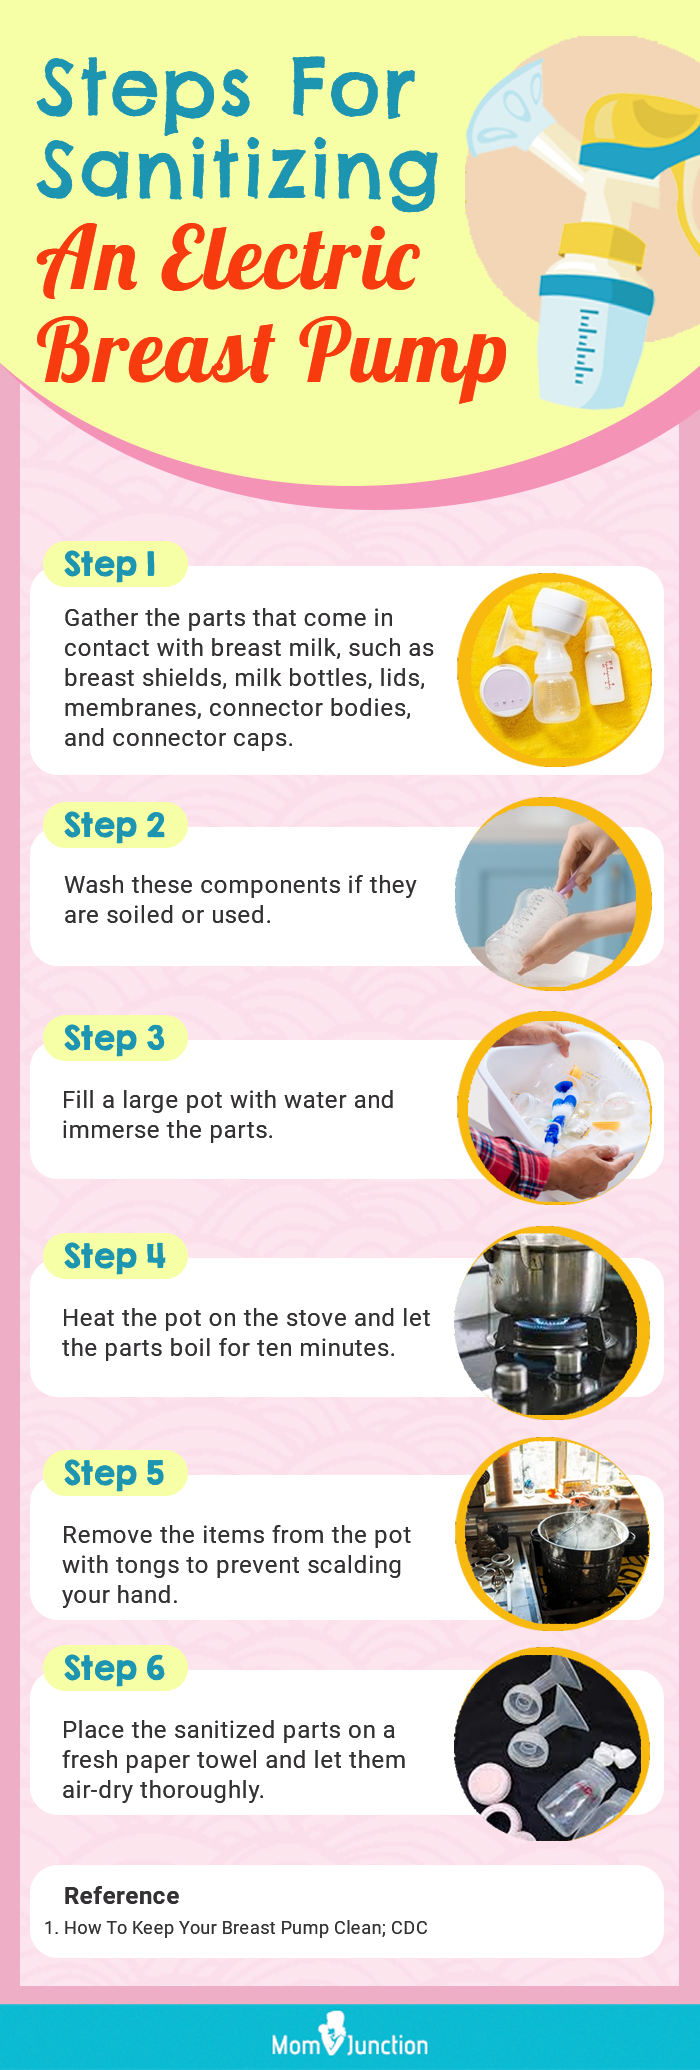 Steps For Sanitizing An Electric Breast Pump (infographic)